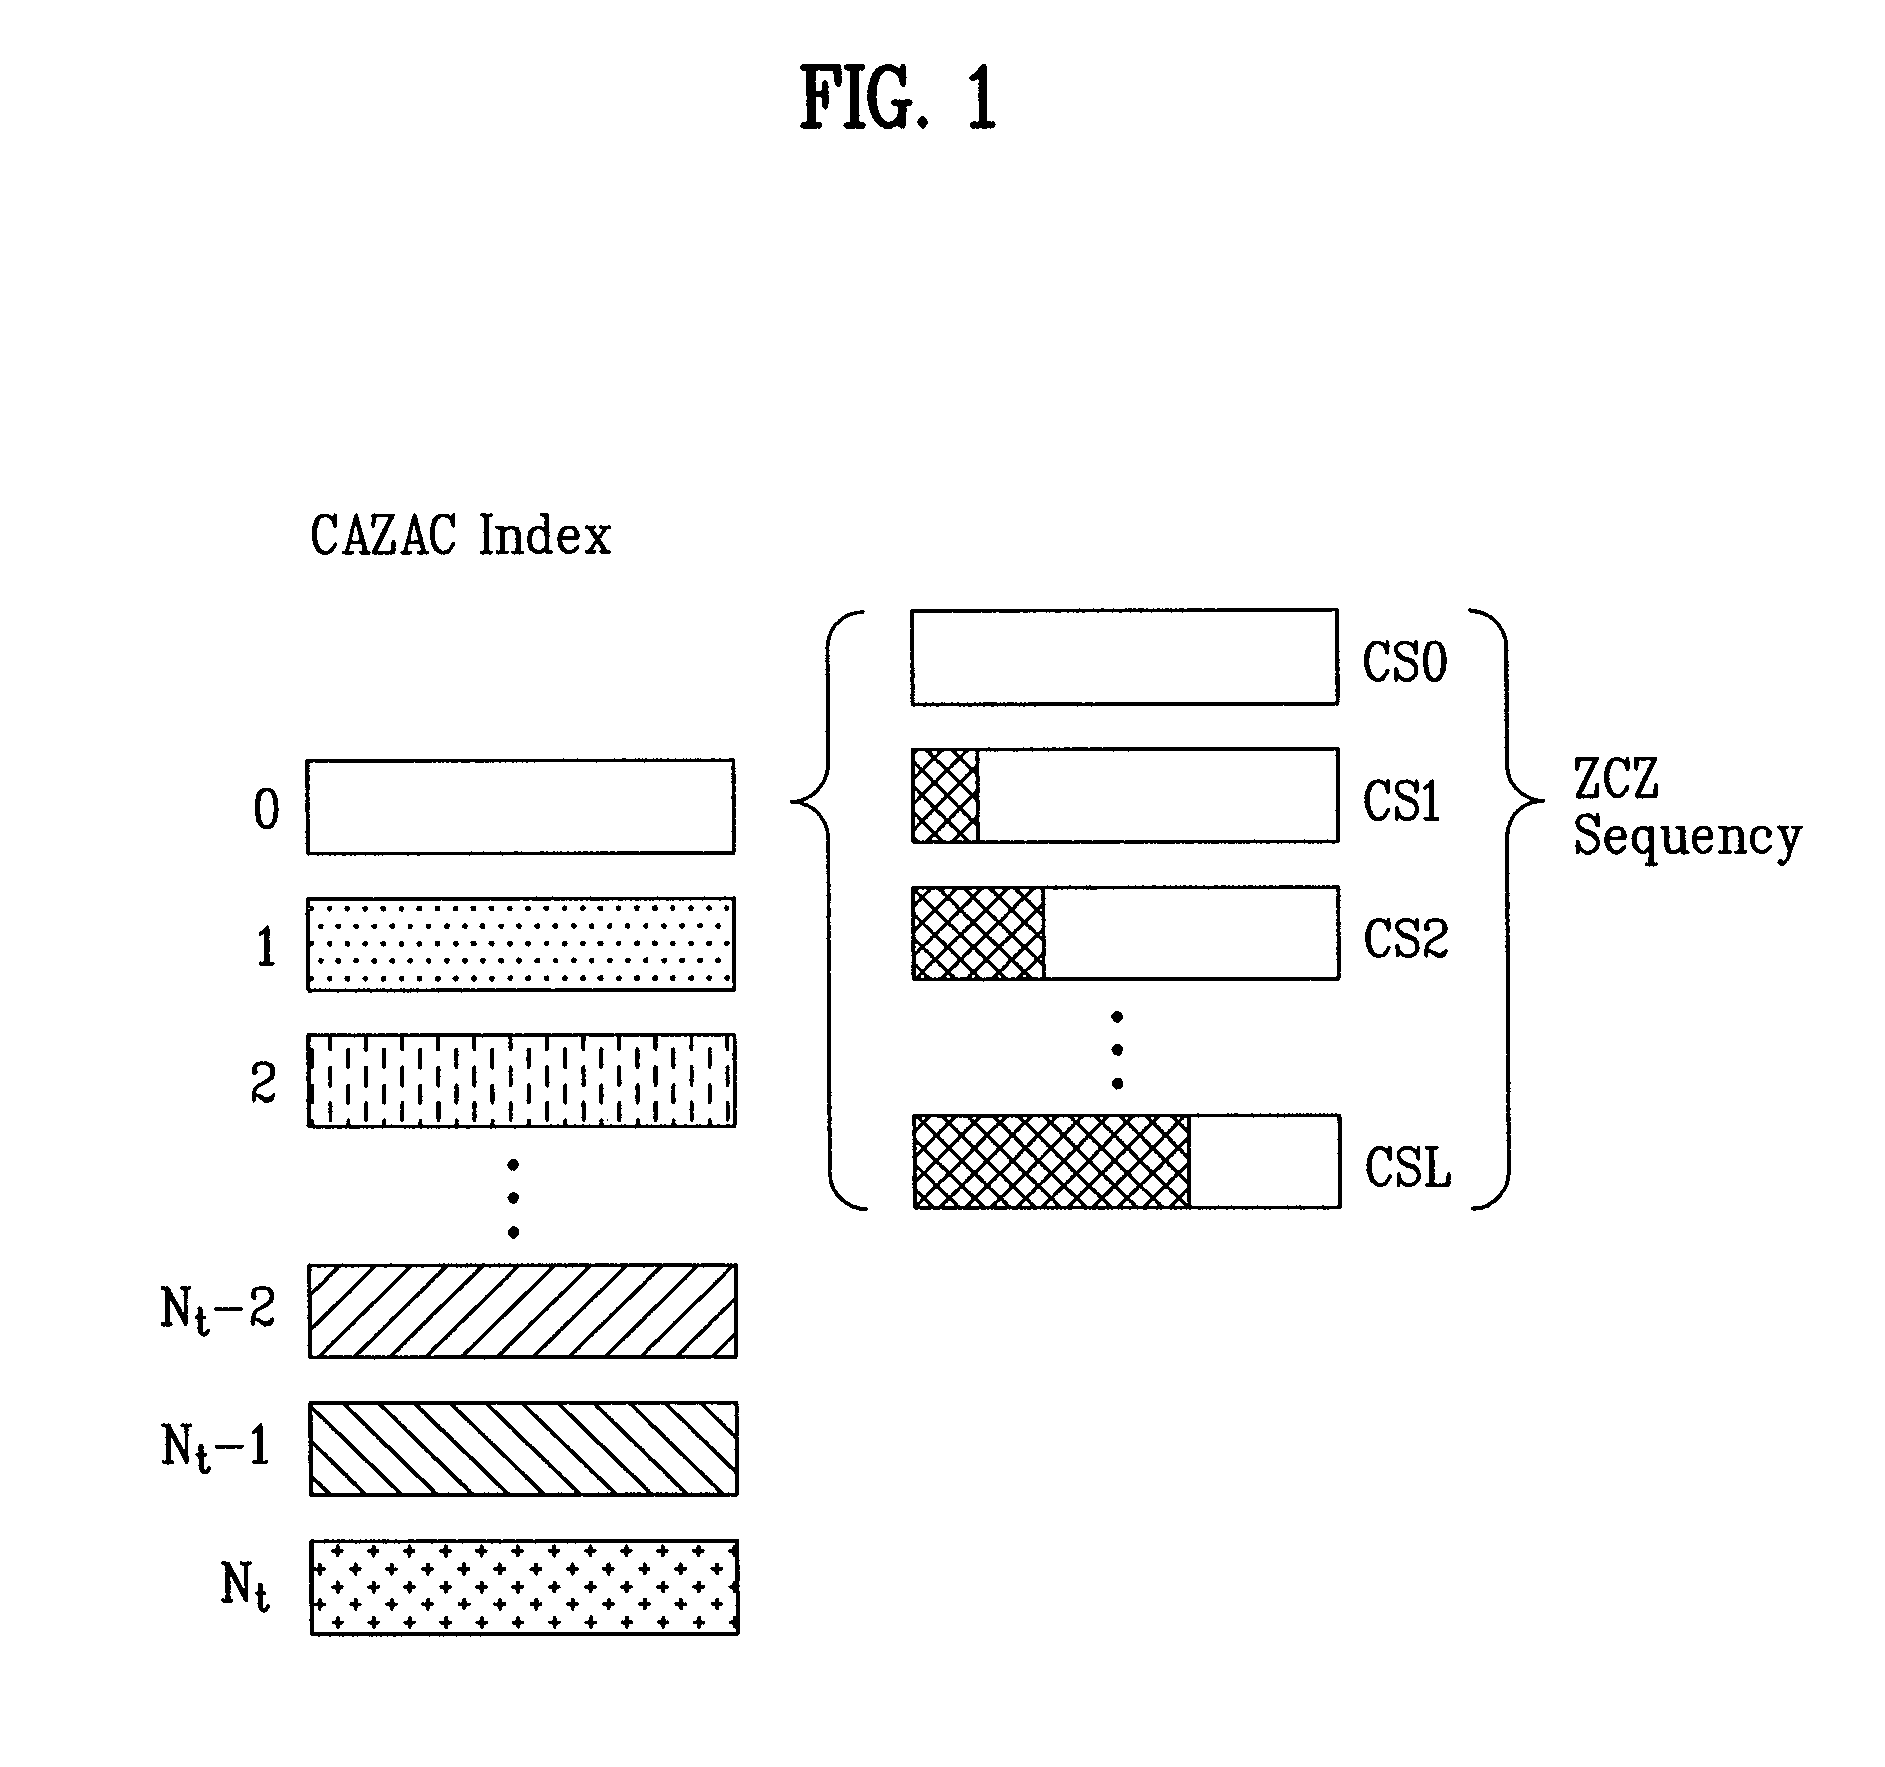 Method for selecting rach freamble sequence for high-speed mode and low-speed mode